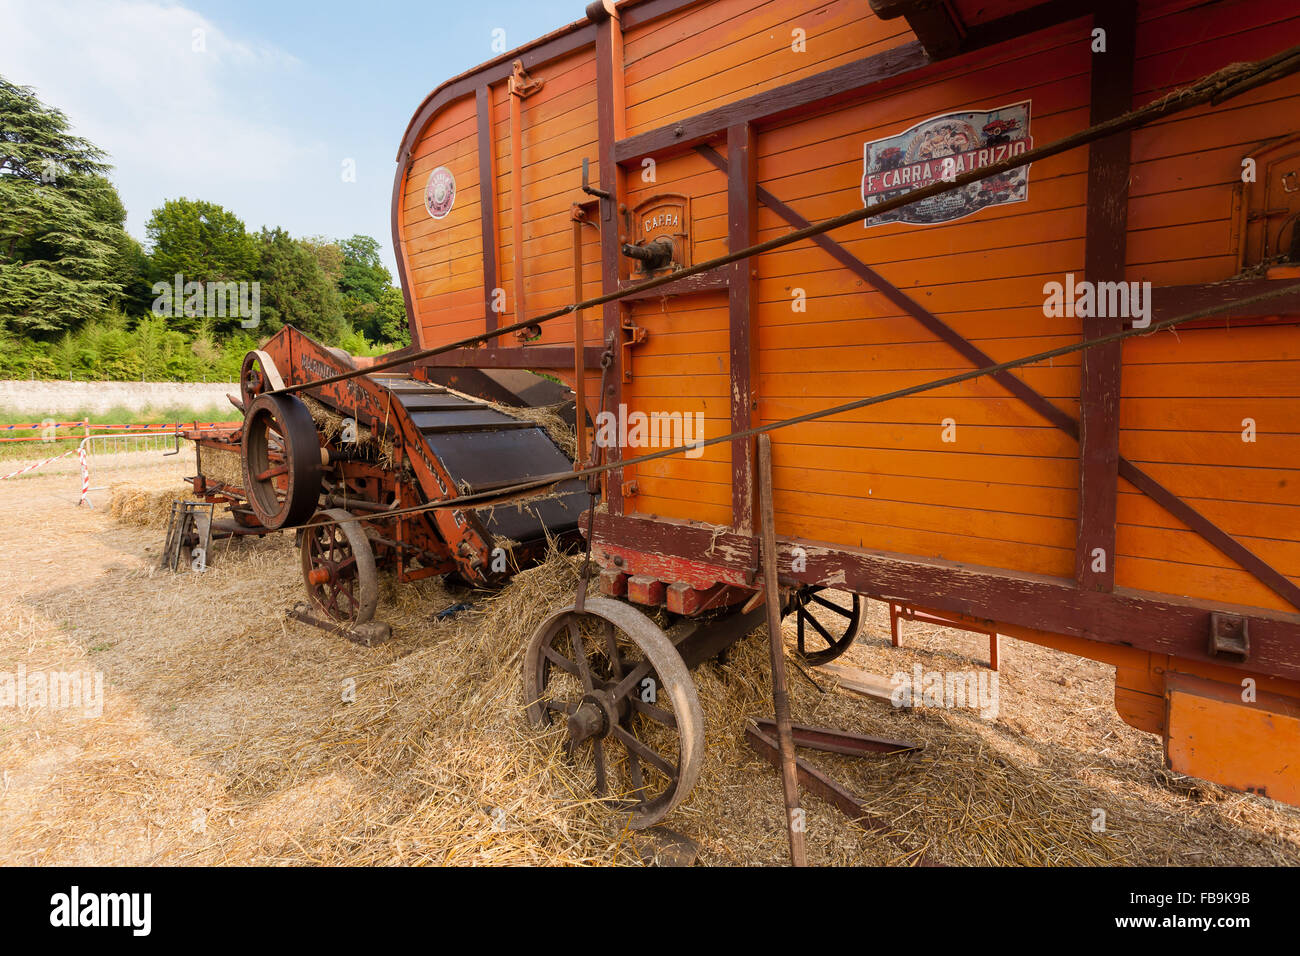 Old straw baler, agricultural vehicle, rural life Stock Photo